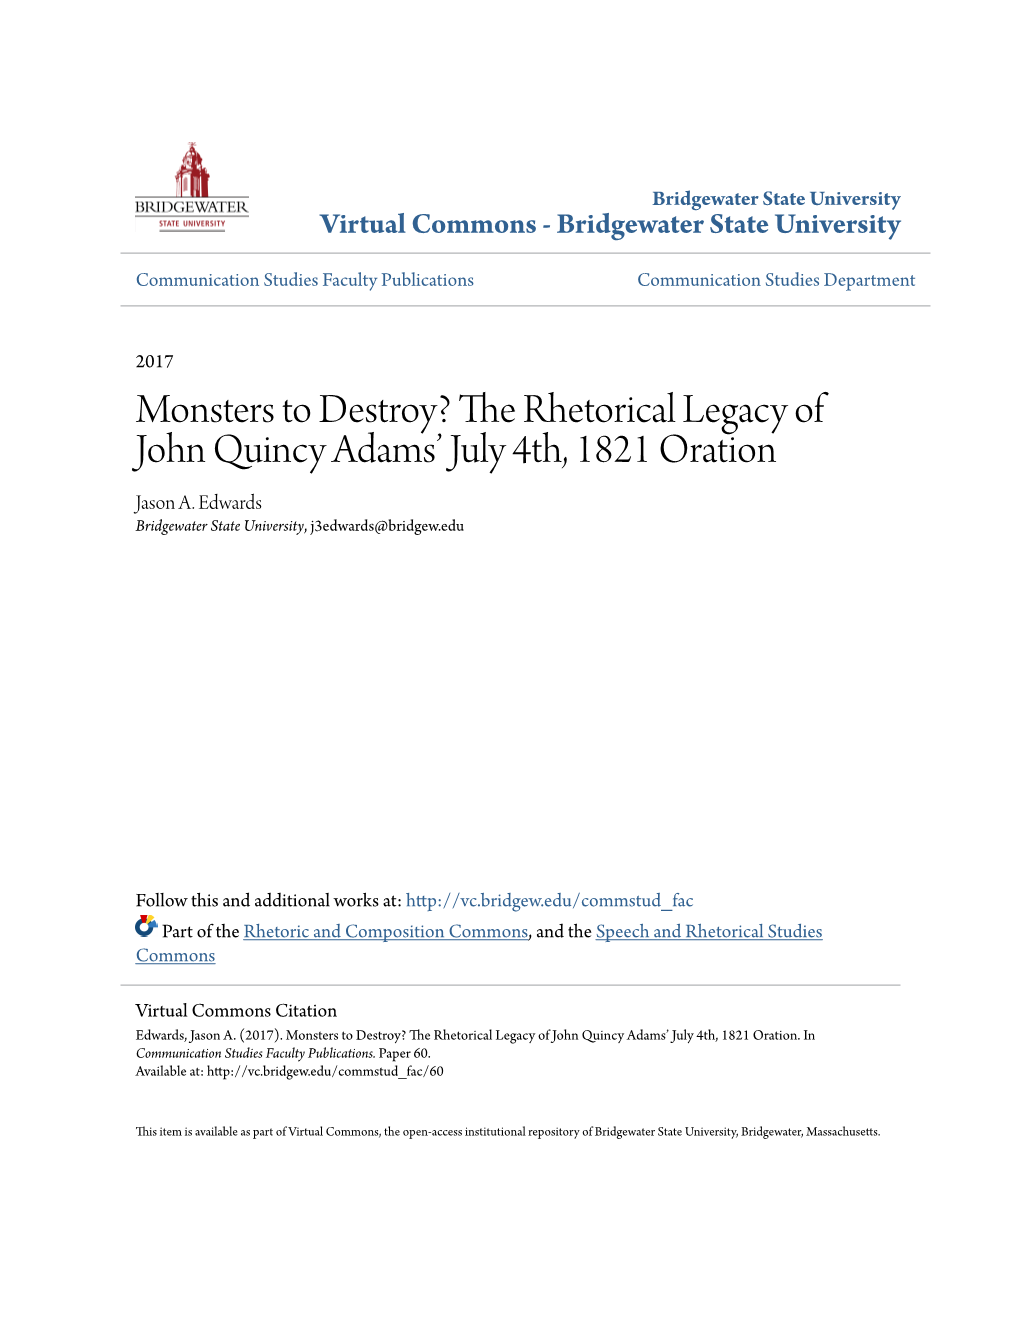 Monsters to Destroy? the Rhetorical Legacy of John Quincy Adams' July